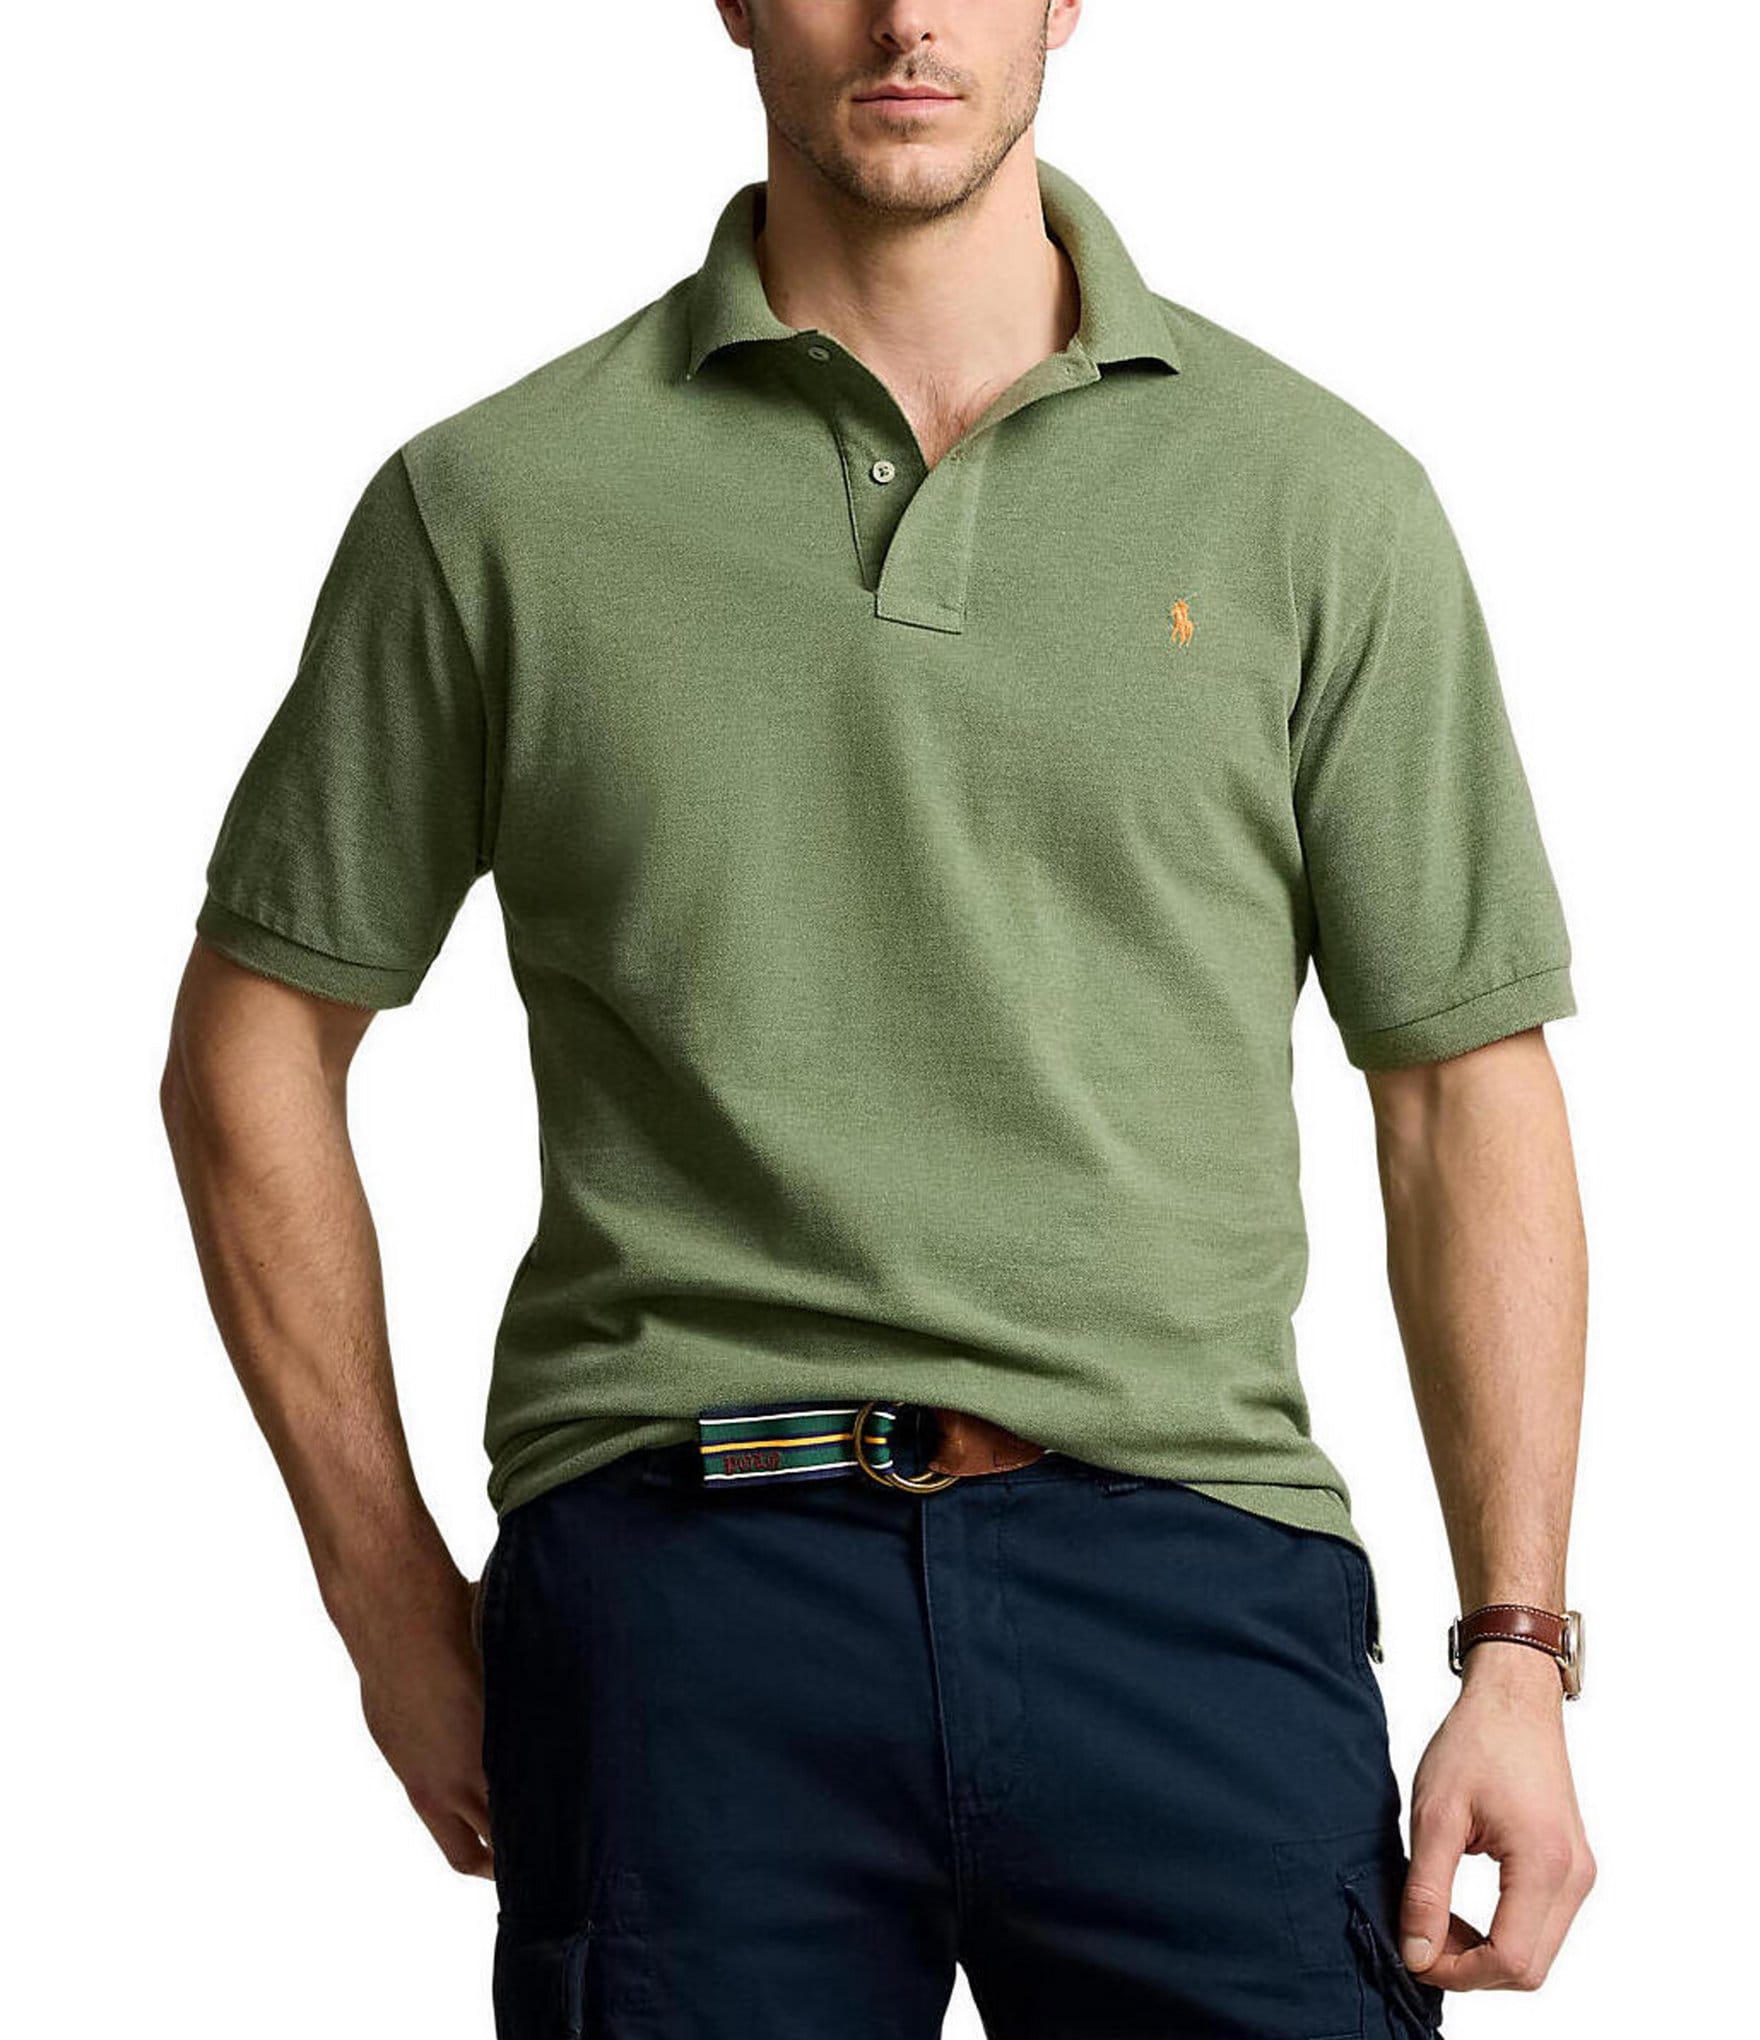 Polo Ralph Lauren Big & Tall Classic Fit Solid Cotton Mesh Polo